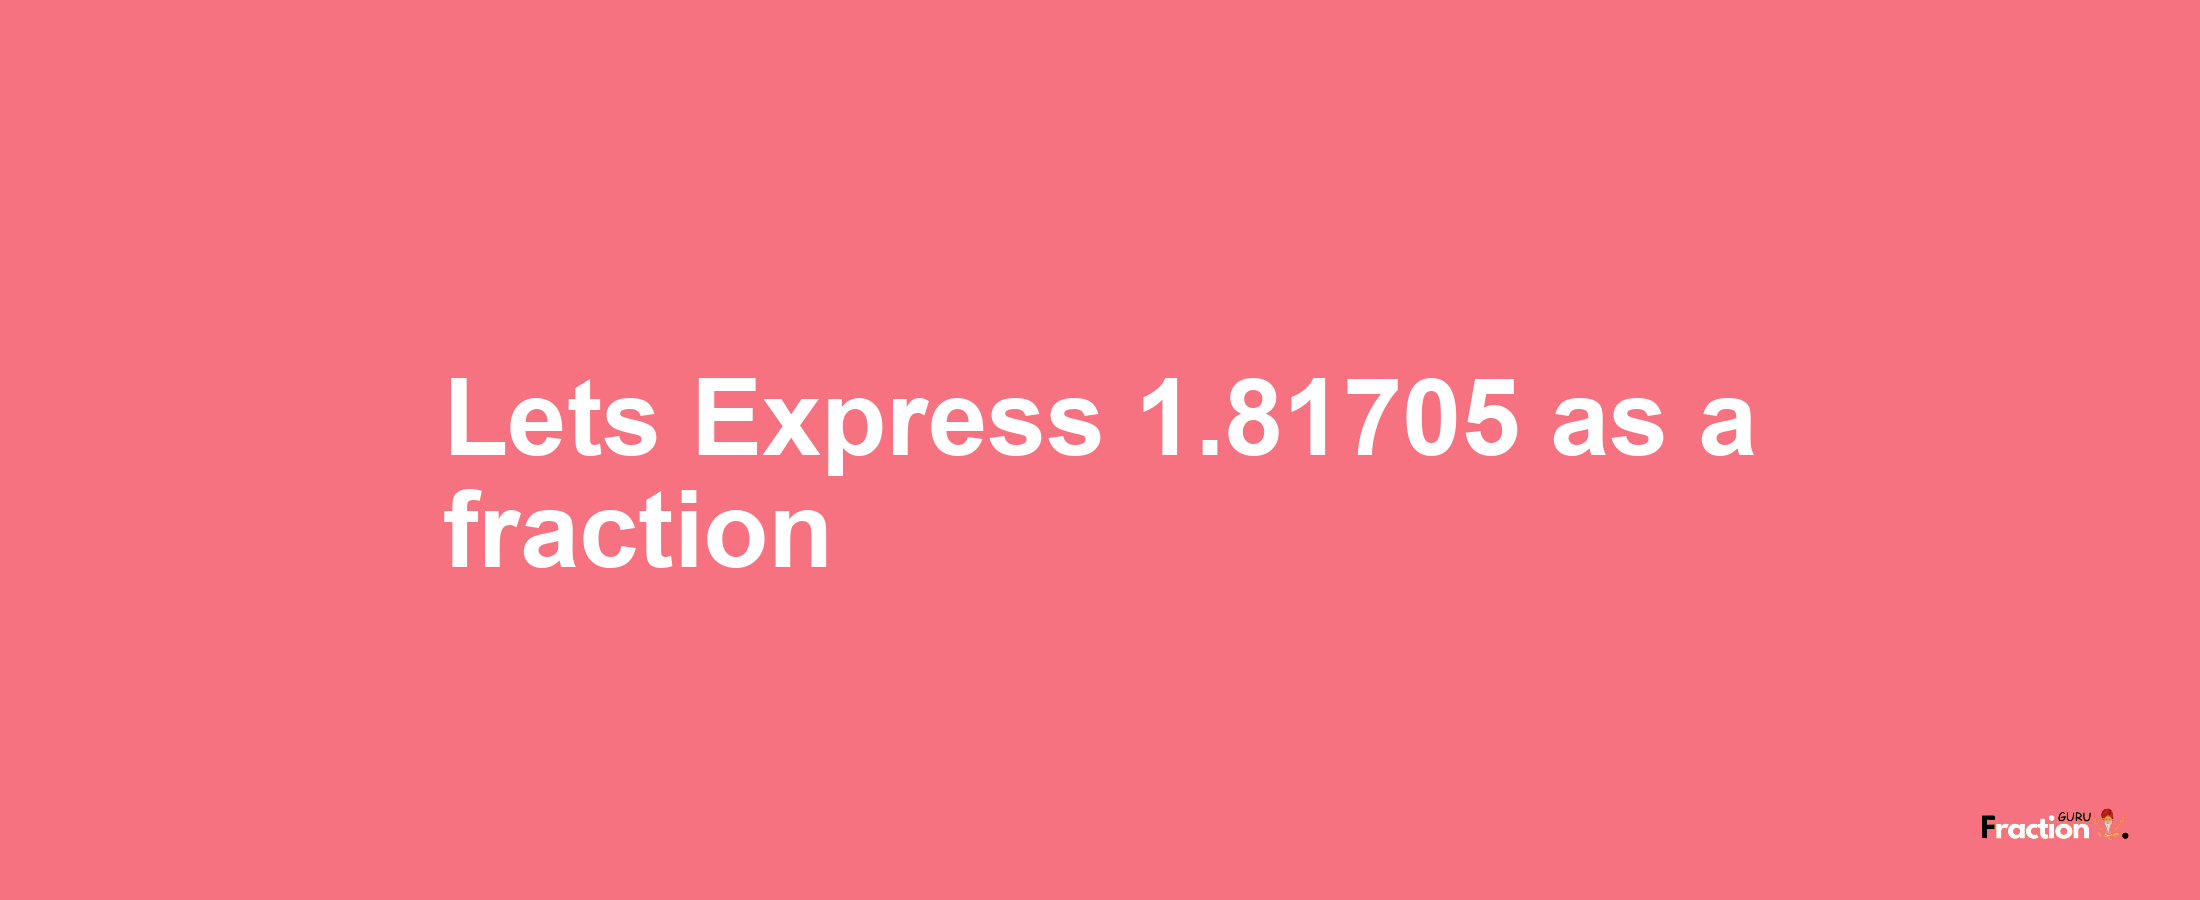 Lets Express 1.81705 as afraction